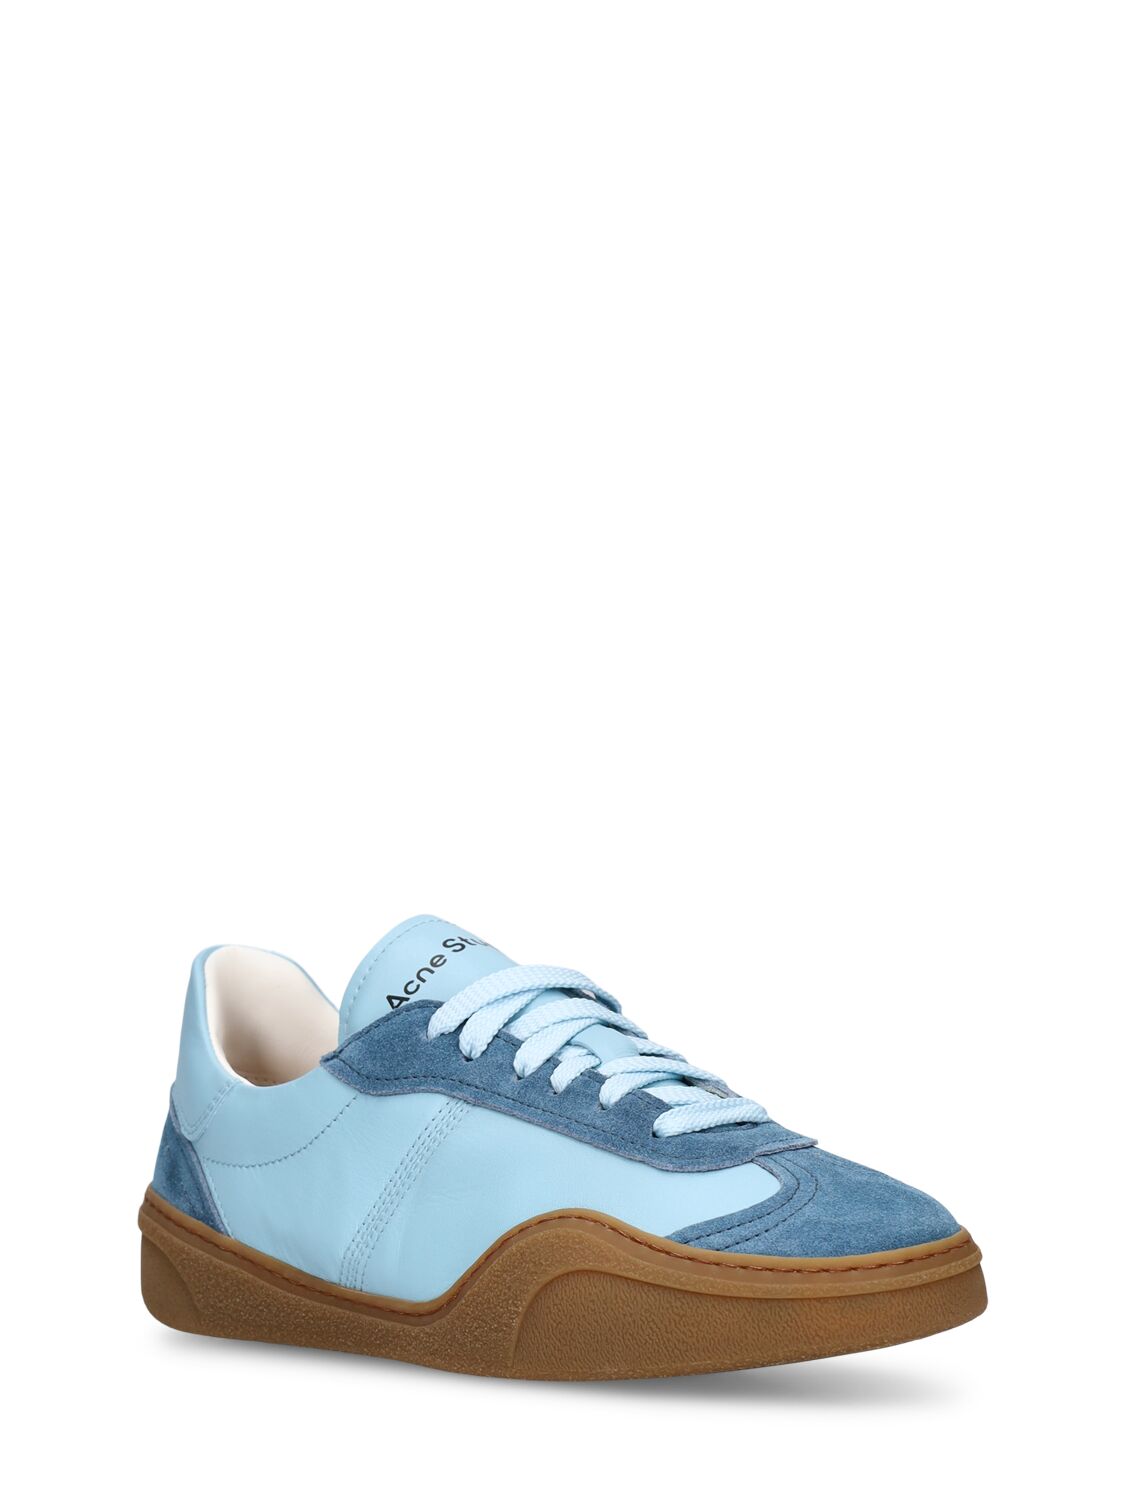 Shop Acne Studios Bars Leather Sneakers In Light Blue,tan